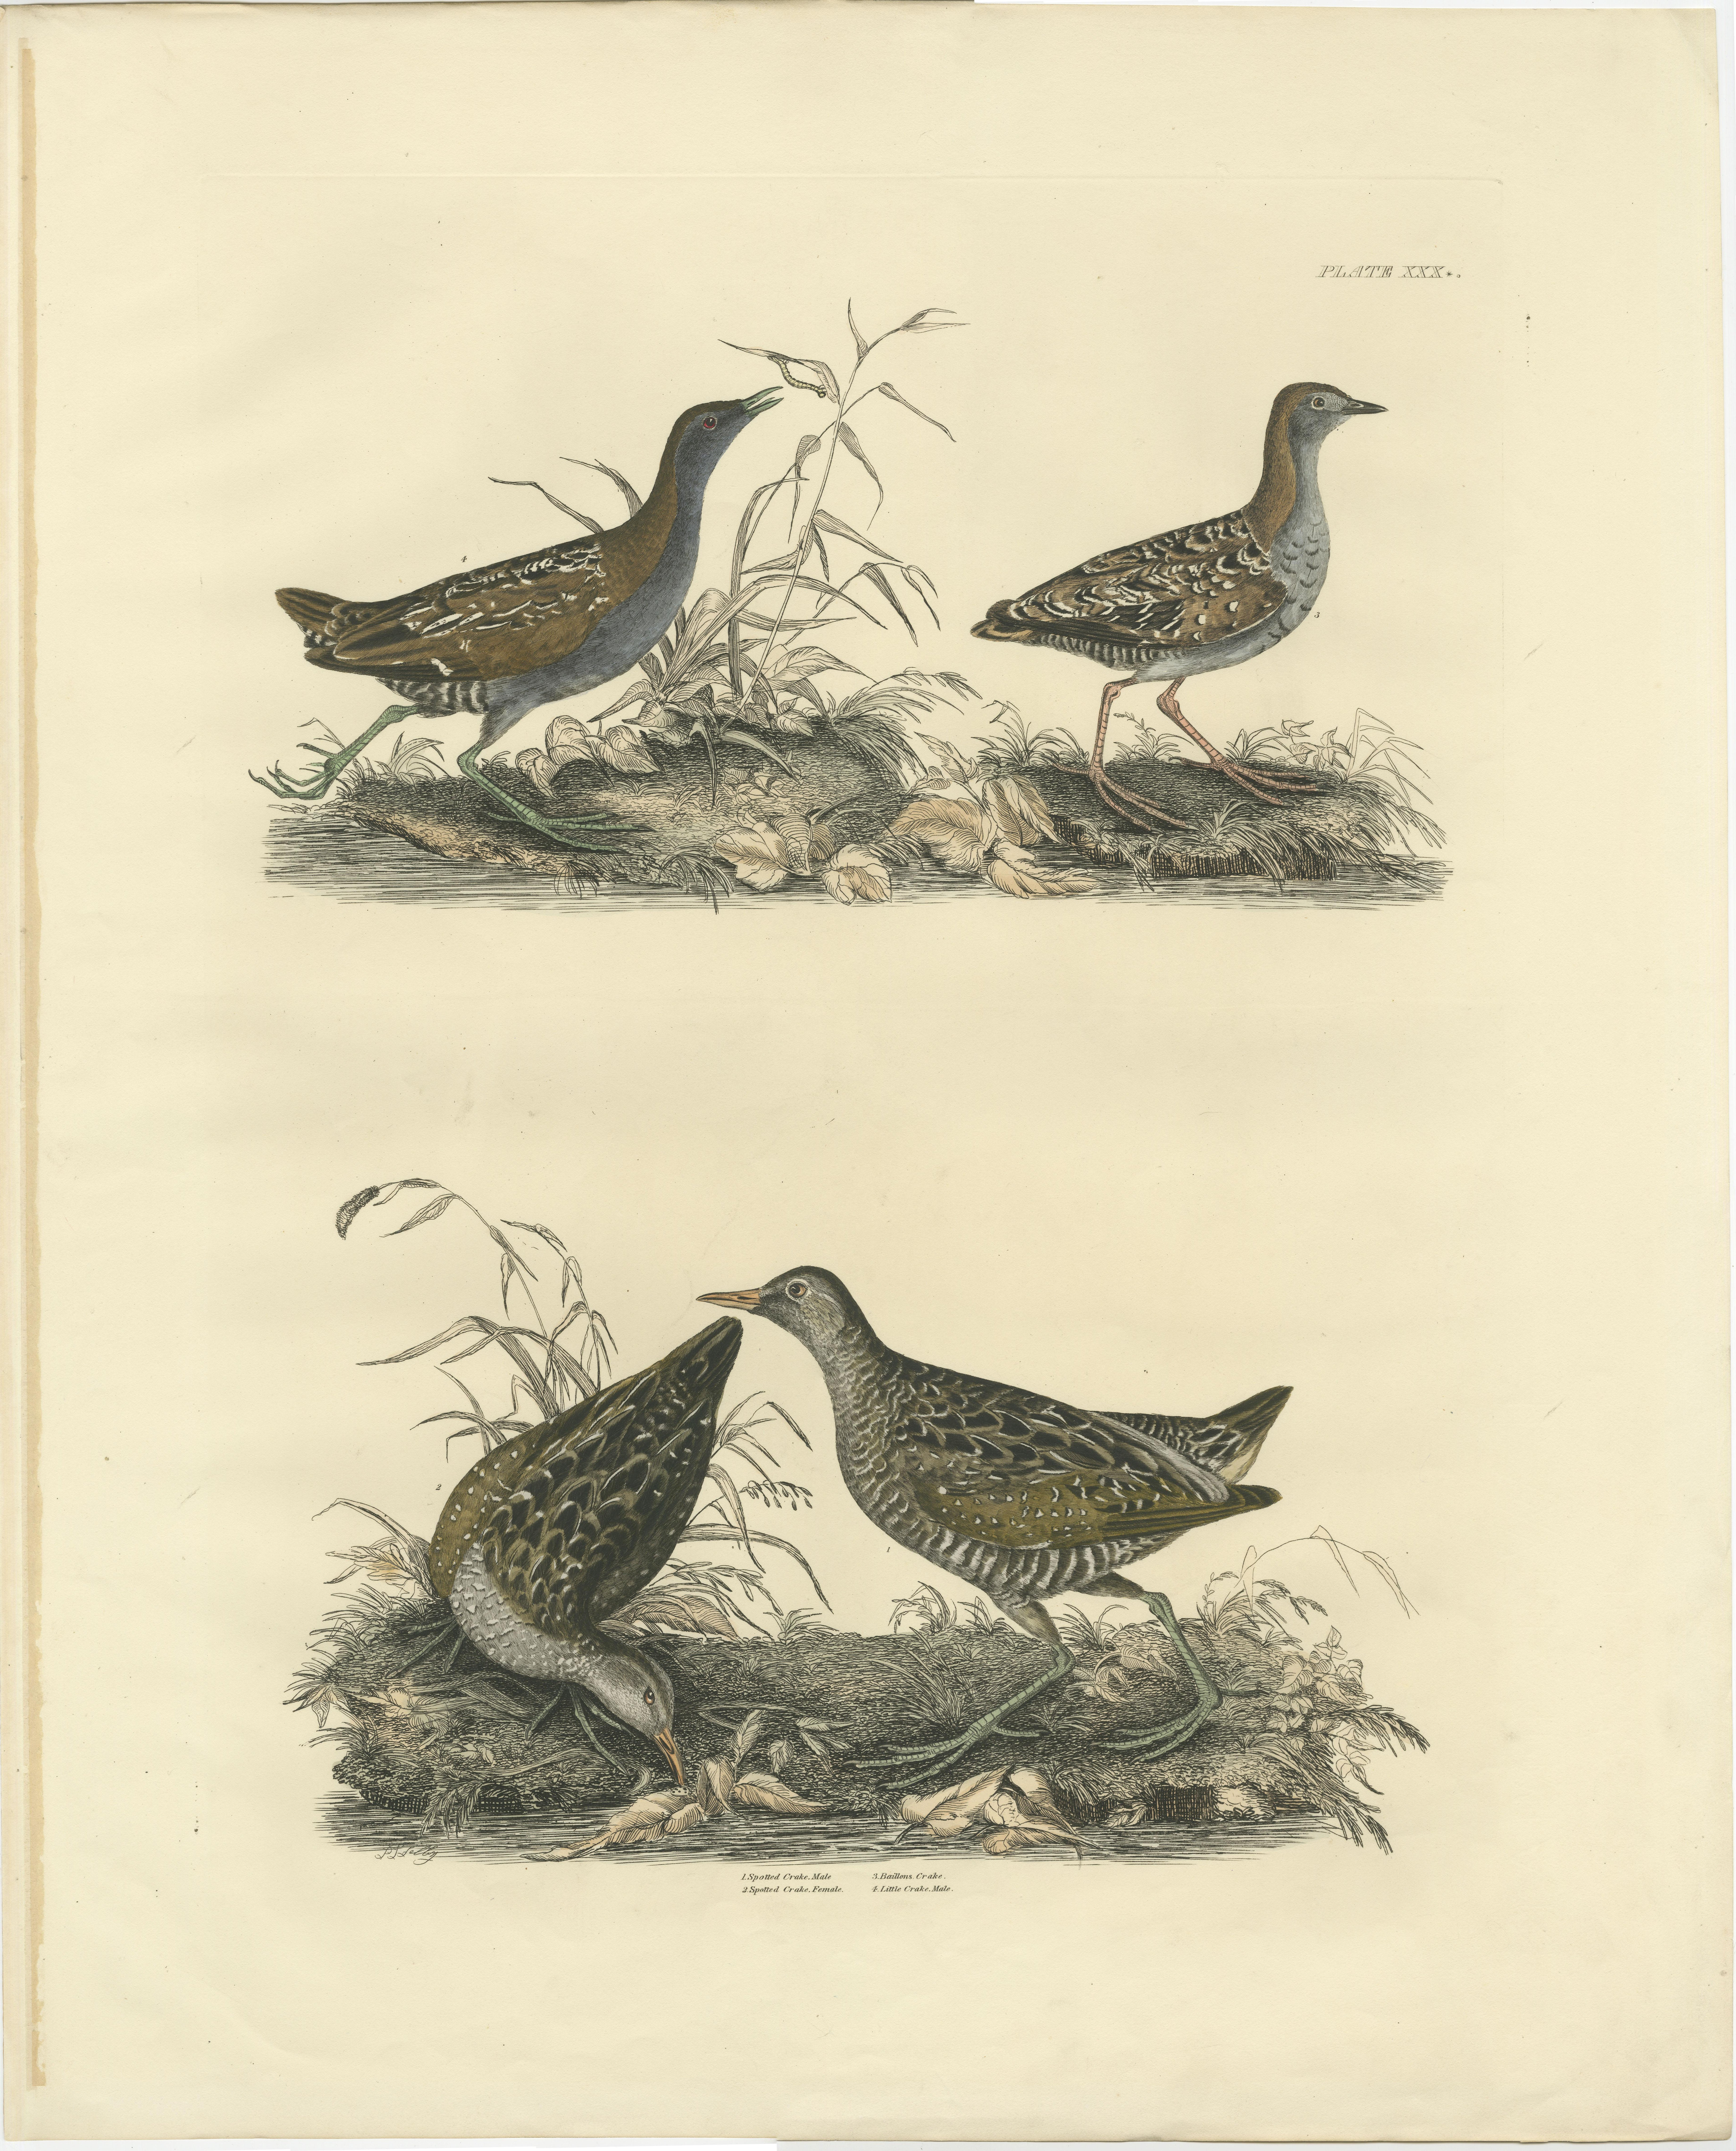 Large original hand-colored antique ornithological print made by Selby and published around 1826. The text identifies the species depicted in the illustration as follows:

1. Spotted Crake, Male
2. Spotted Crake, Female
3. Baillon's Crake
4. Little